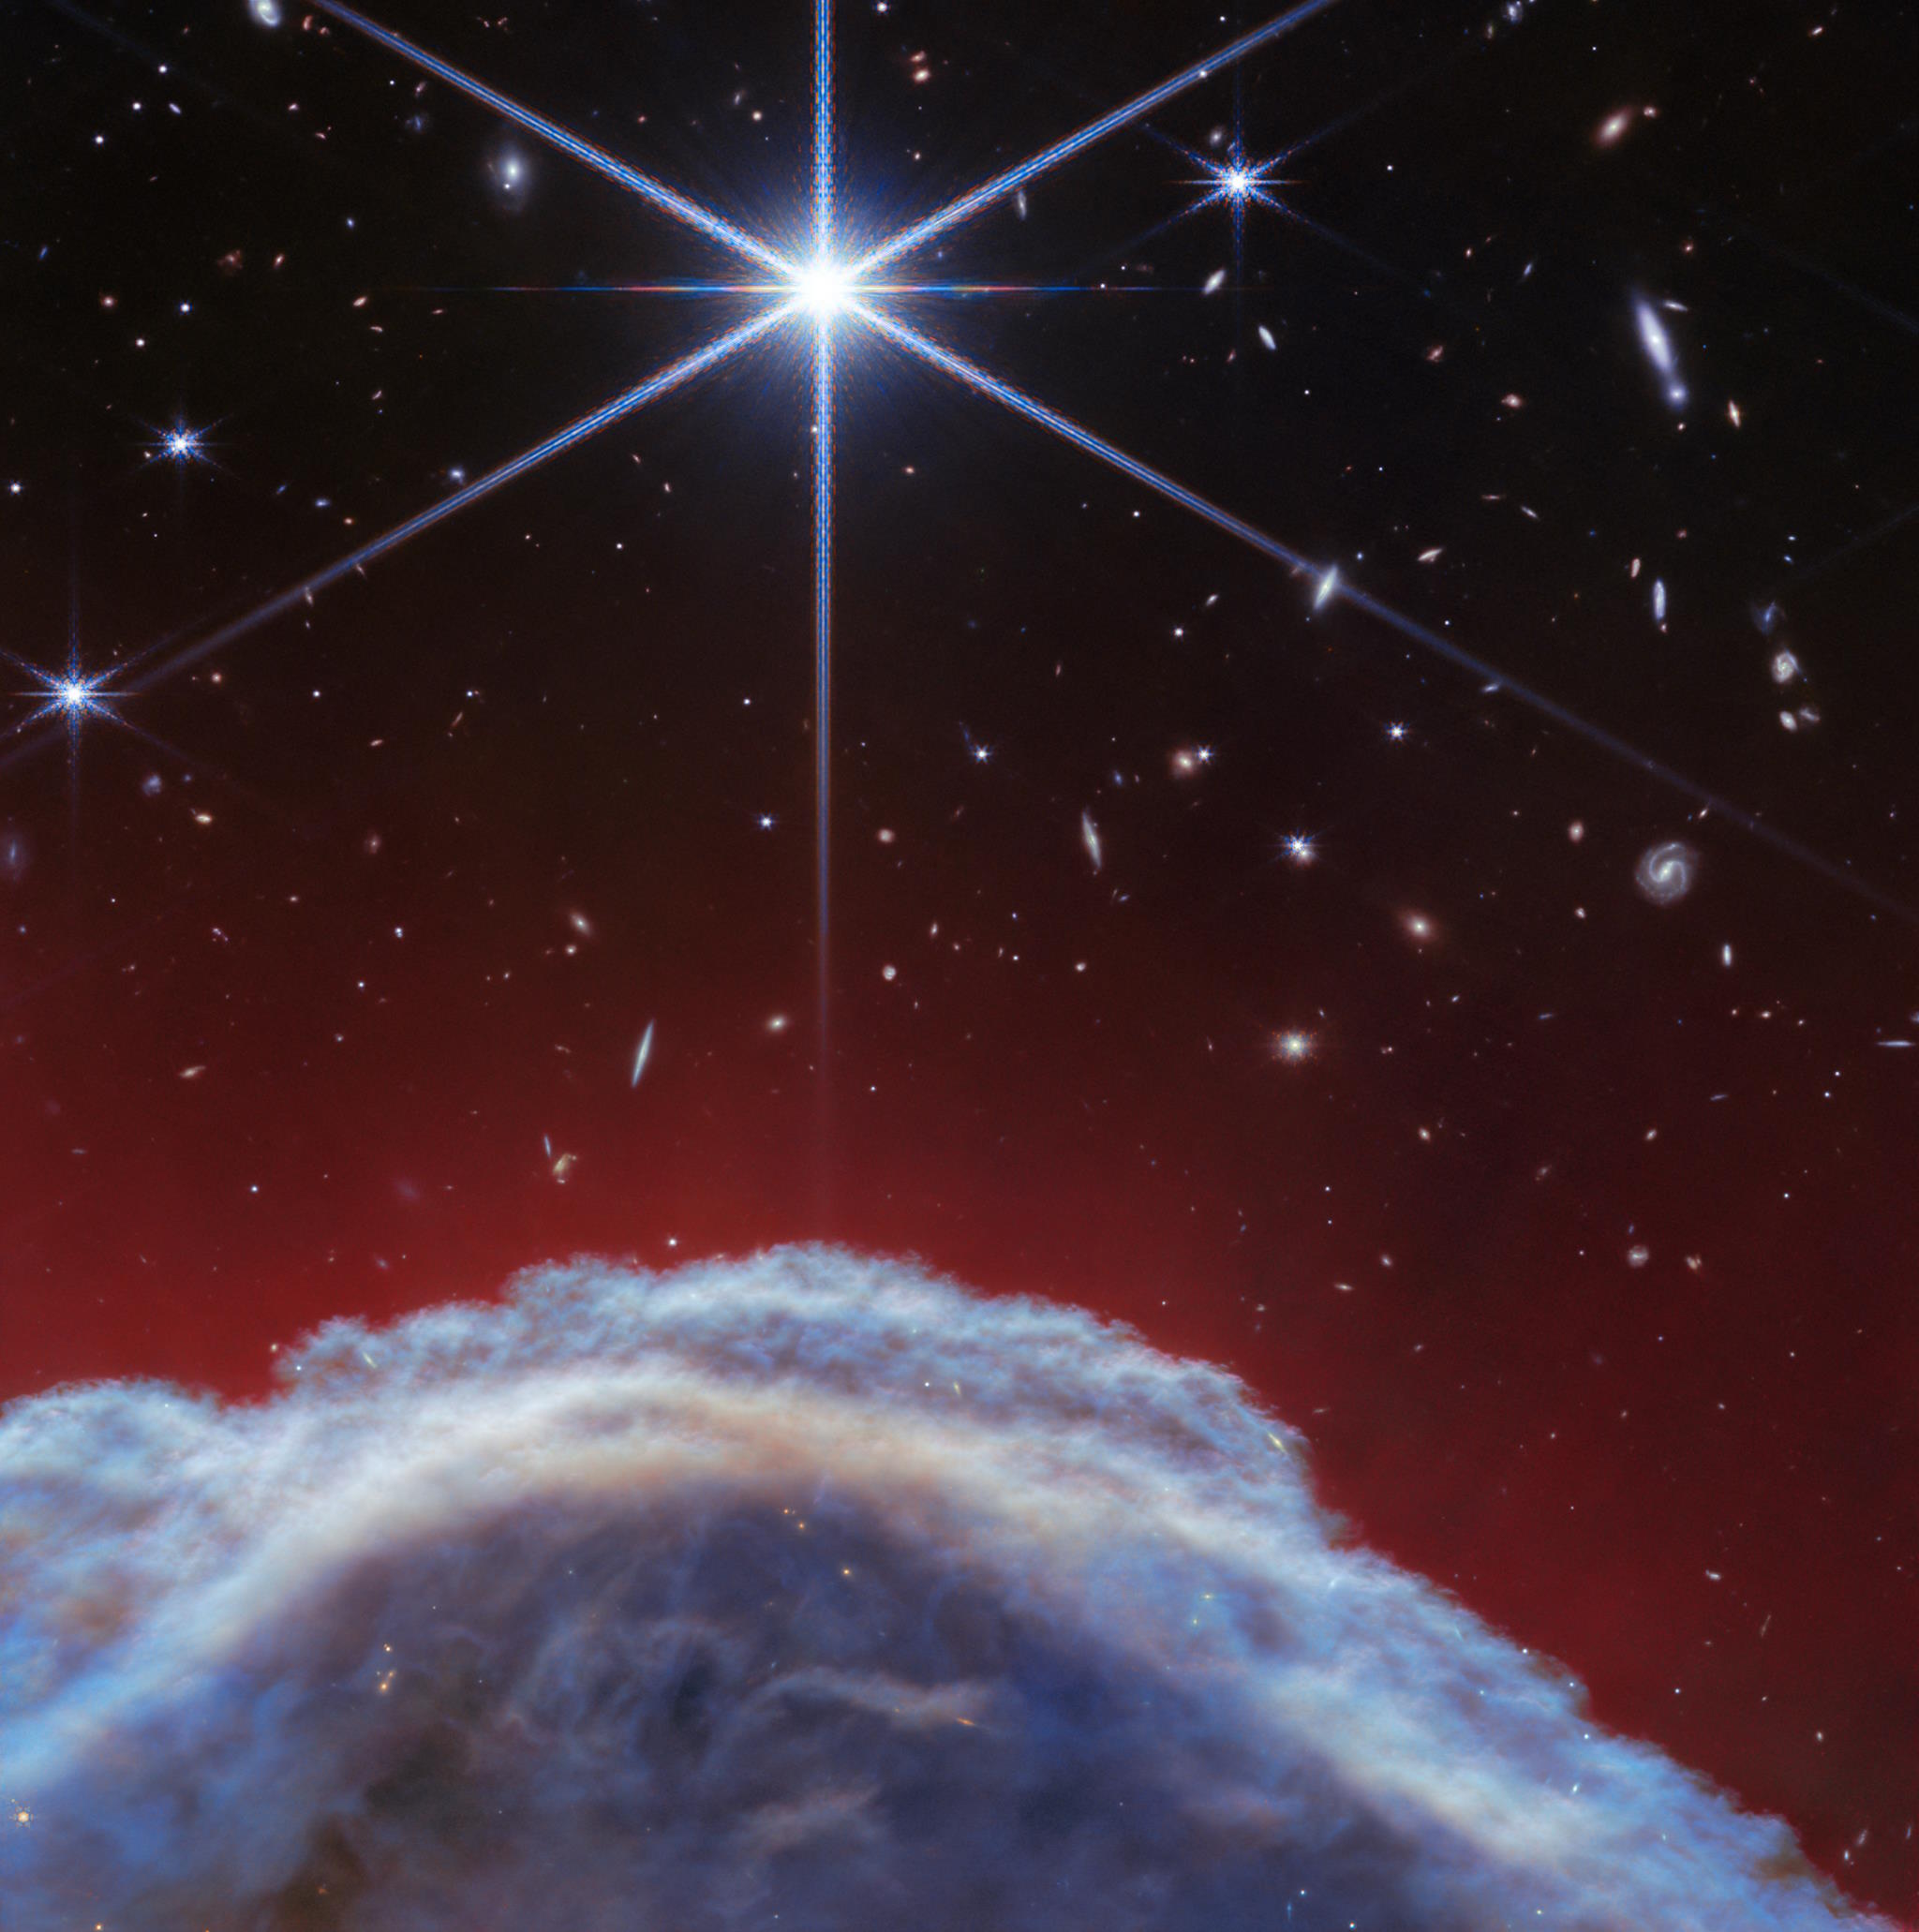 A celestial image captured by the JWST showing a bright star at the center with smaller stars and a vibrant, cloud-like Horsehead Nebula in the foreground against a deep red and black space background.